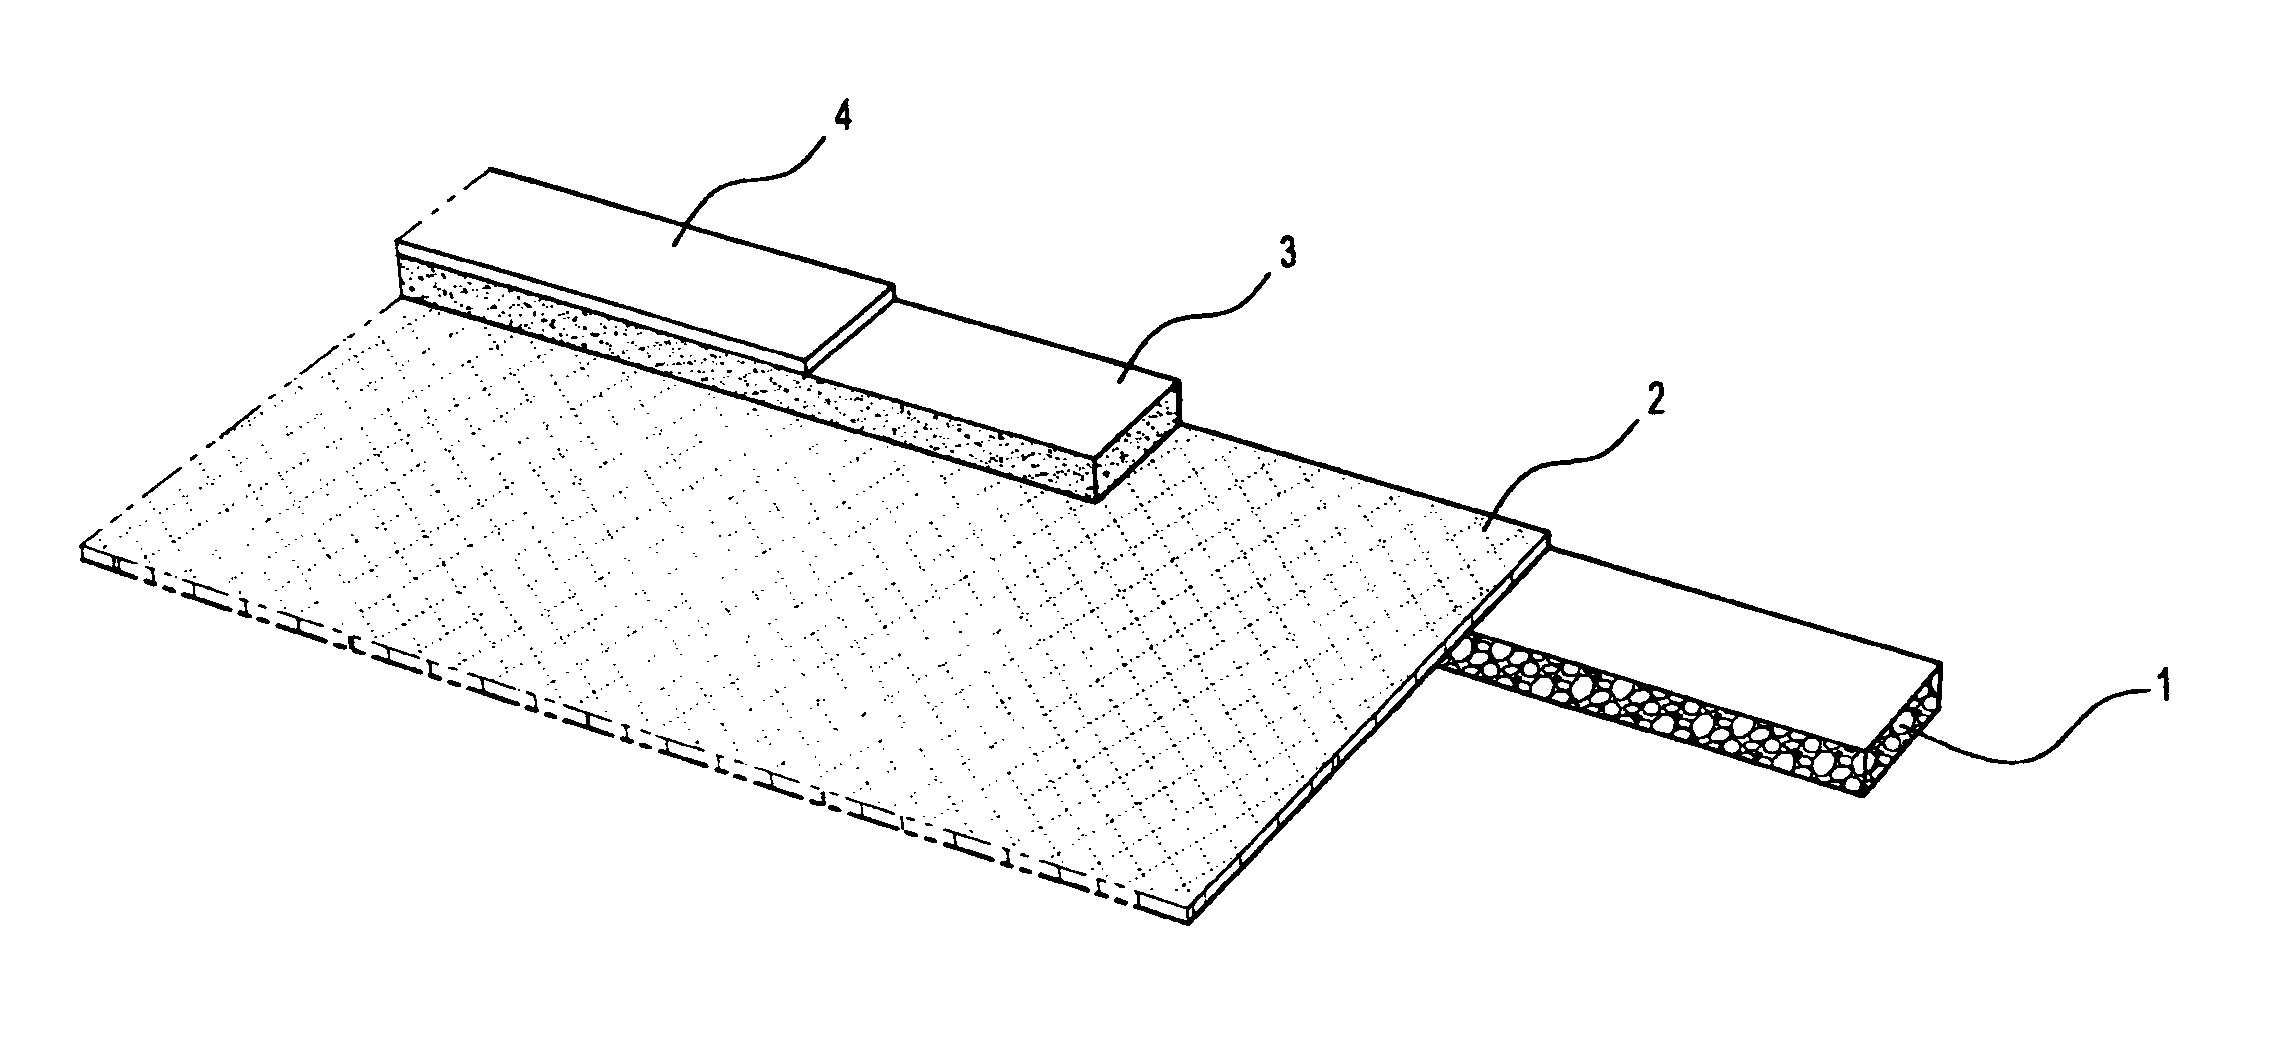 Gutter guard mesh secured using adhesive